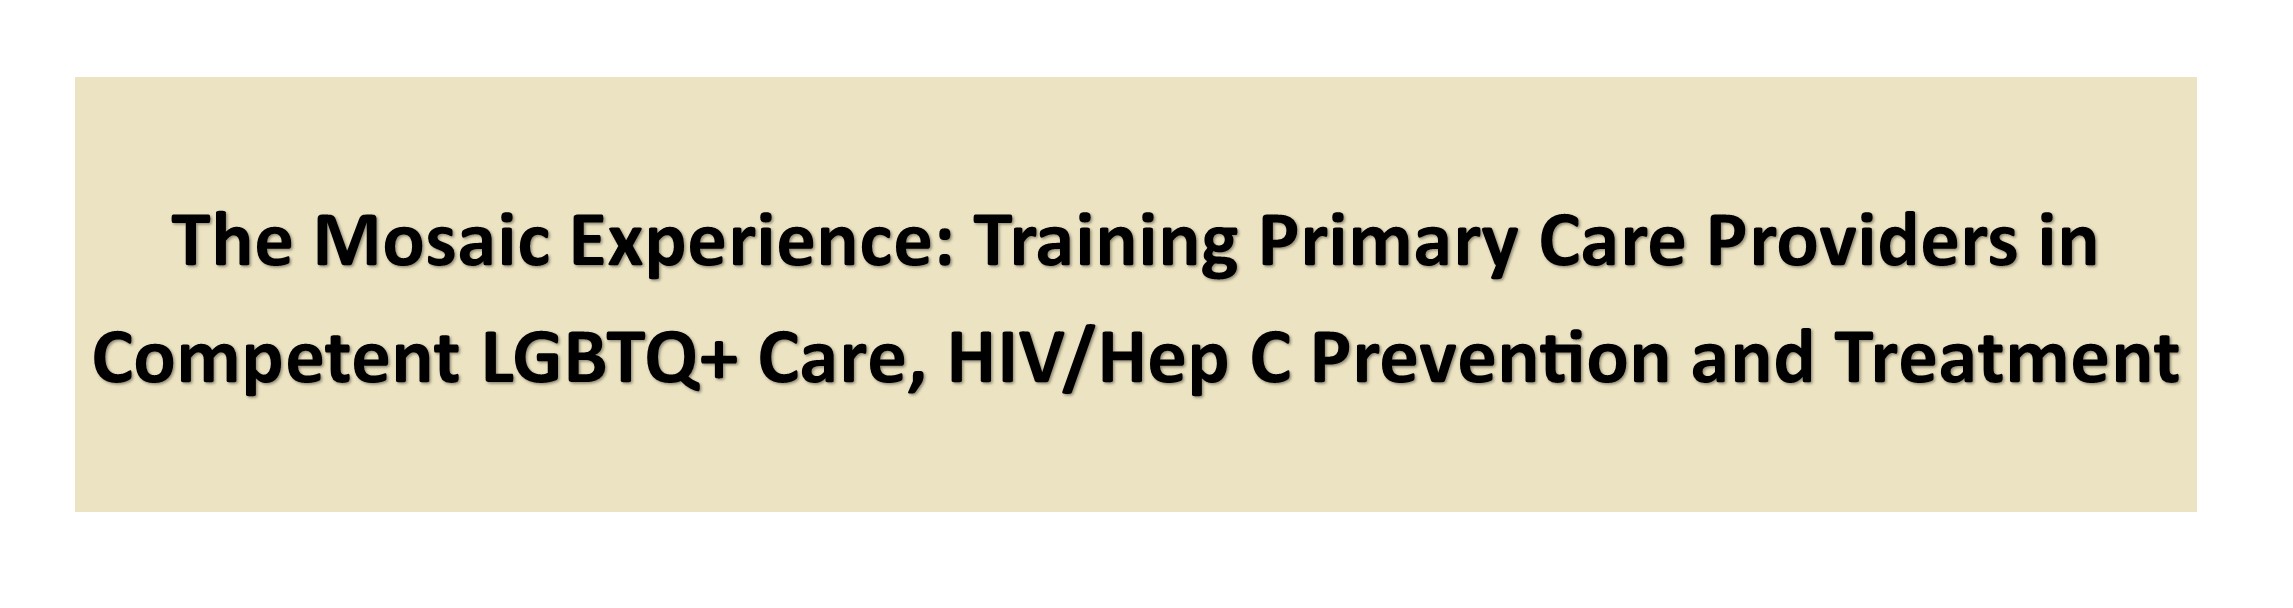 The Mosaic Experience: Training Primary Care Providers in Competent LGBTQ+ Care, HIV/Hep C Prevention and Treatment Banner